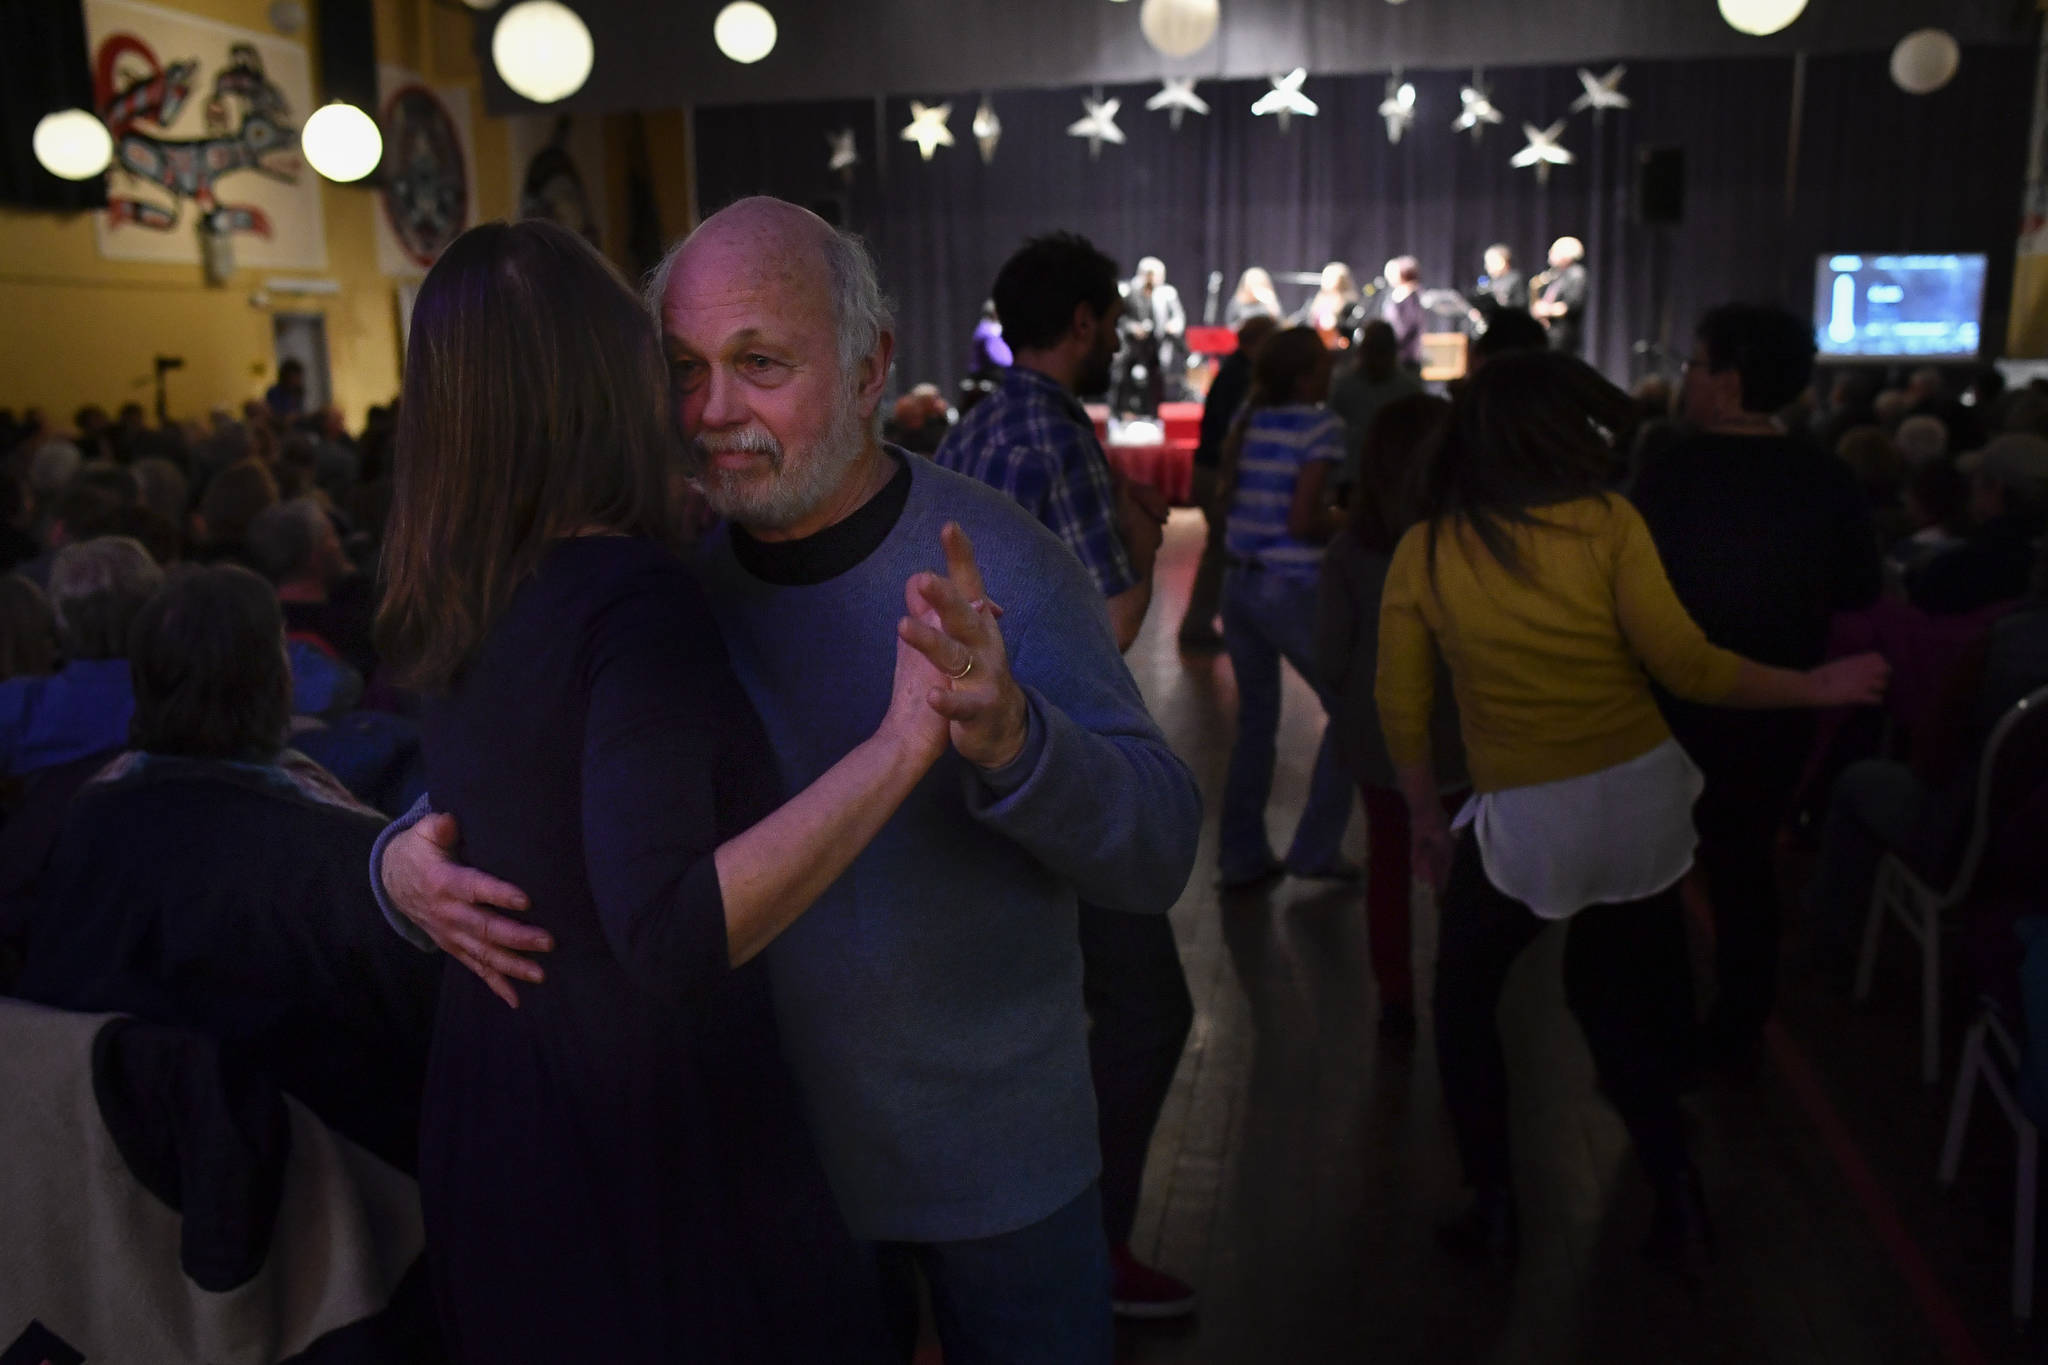 Jim Fowler dances with his wife Susi during the performance of “Motown for Our Town” featuring Ryan Shaw, Bobby Lewis, Eustace Johnson, Jaunelle Celaire and others at the Juneau Arts & Culture Center on Friday, March 1, 2019. (Michael Penn | Juneau Empire)